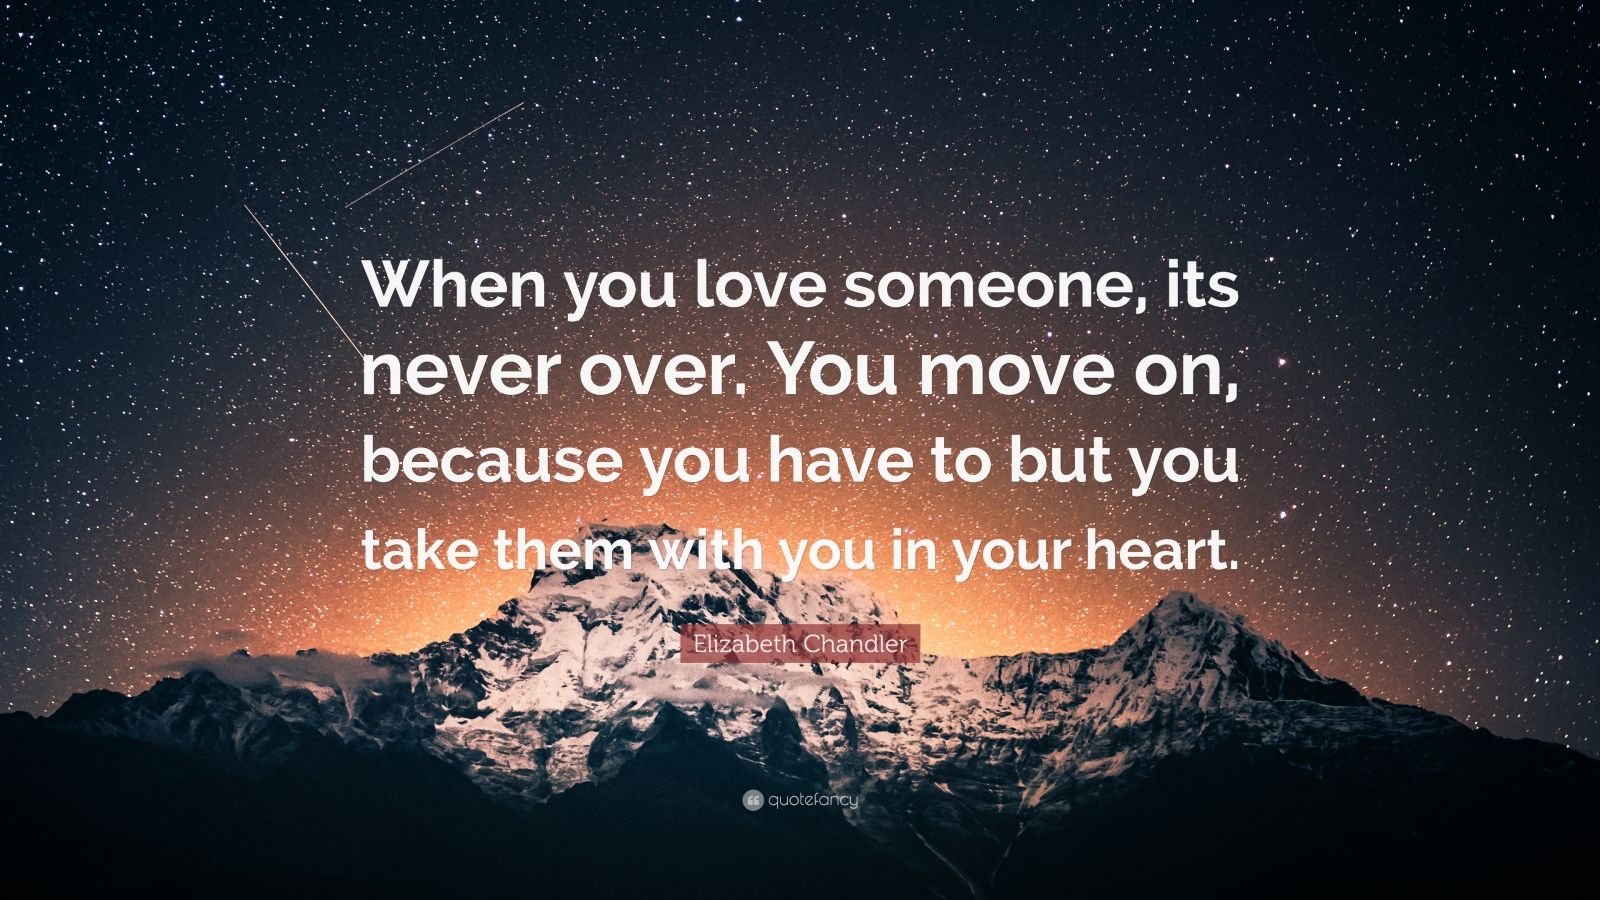 Elizabeth Chandler Quote: “When you love someone, its never over. You ...